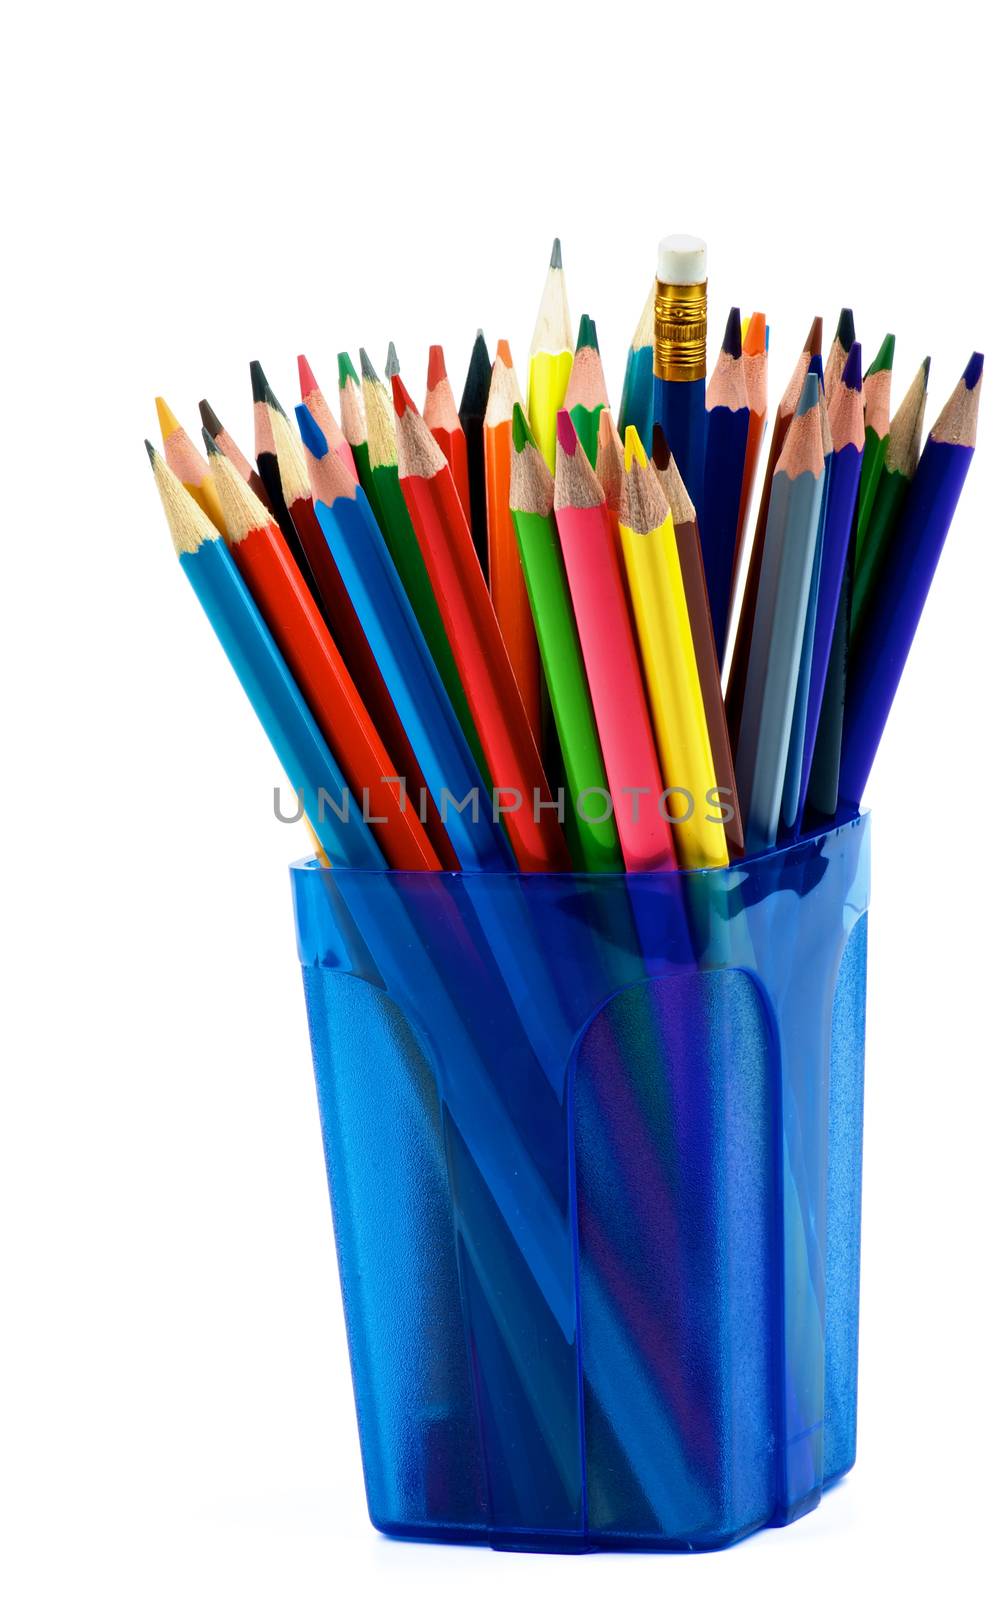 Lead, Colored and Crayon Sharp Pencils in Blue Container isolated on white background